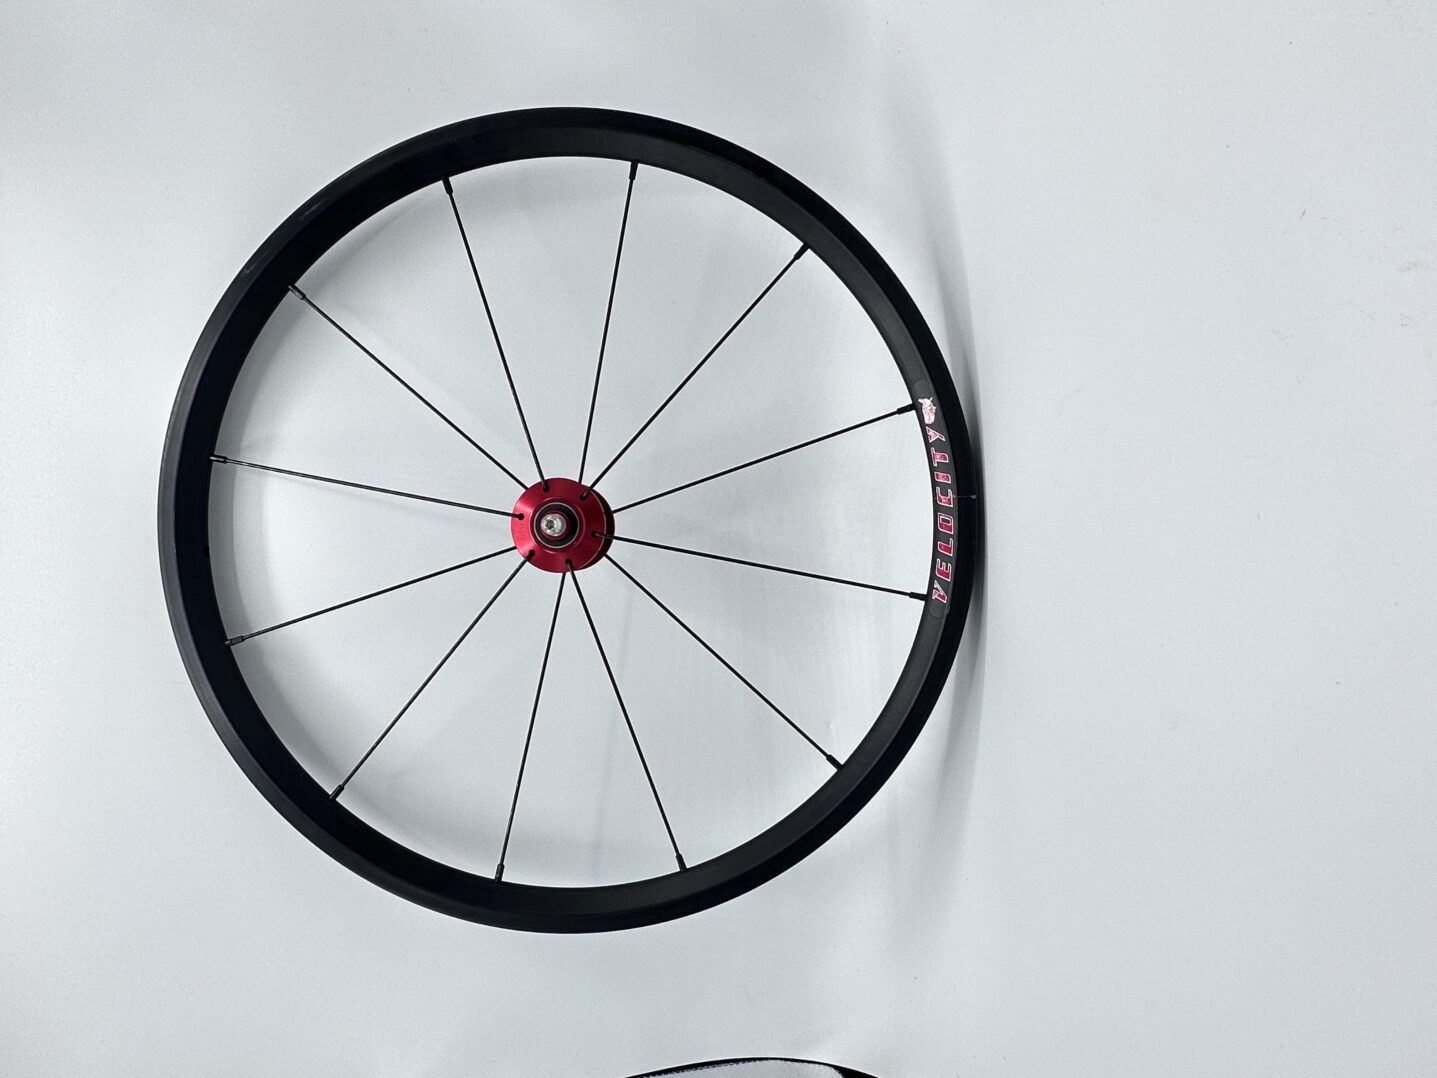 A RW-Carbonbike 20" racing chair wheel with a red spoke and a black spoke.